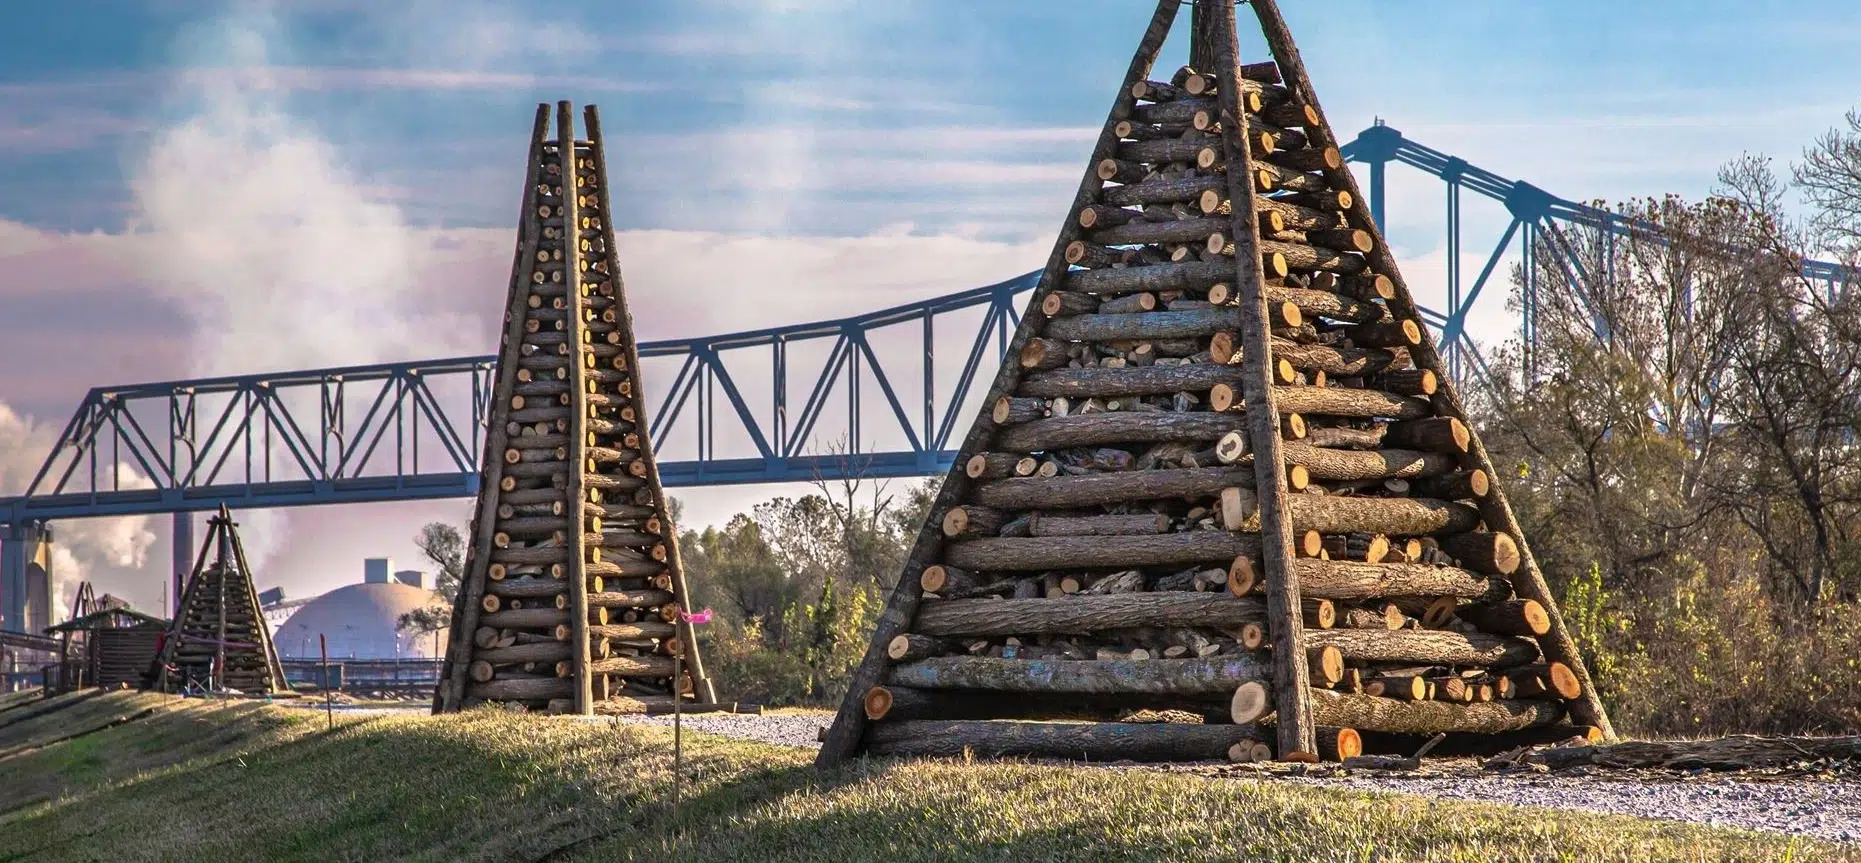 Lighting of the Bonfires on Christmas Eve in St. James Parish gets the greenlight for 2021